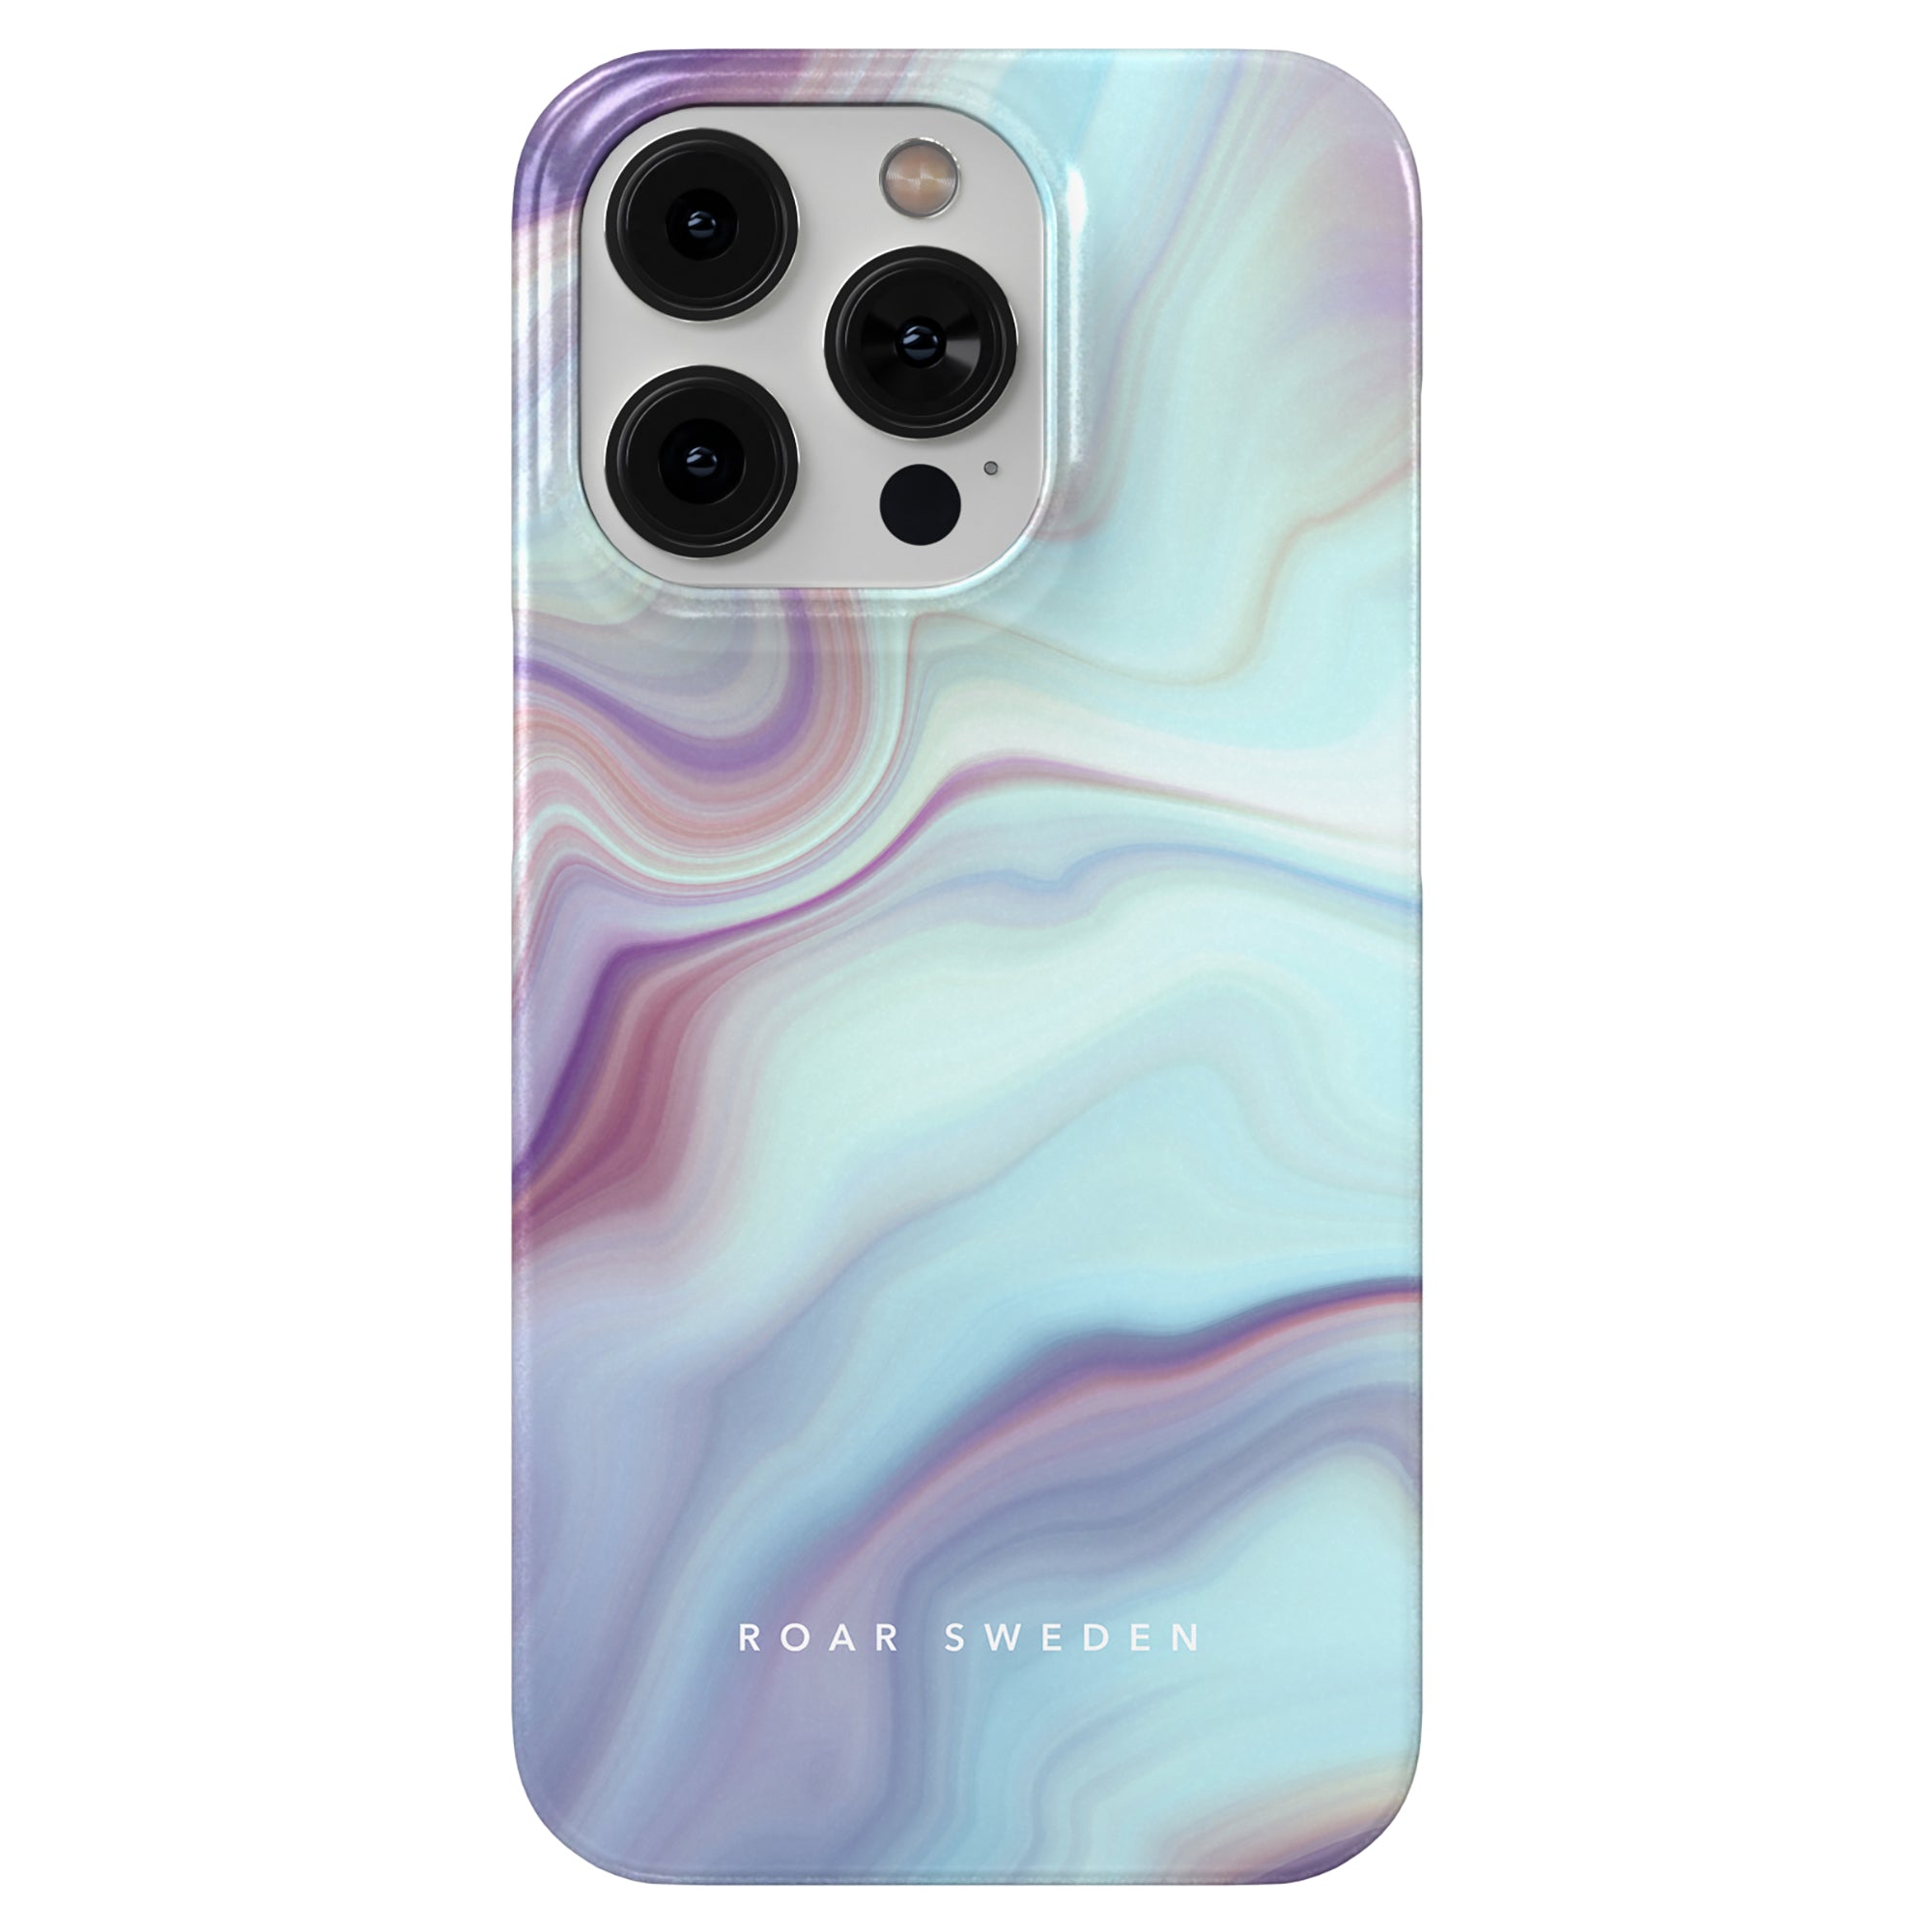 A smartphone with a marbled pastel phone case from the Abalone Slim case collection that reads "roar sweden" and includes three camera lenses.